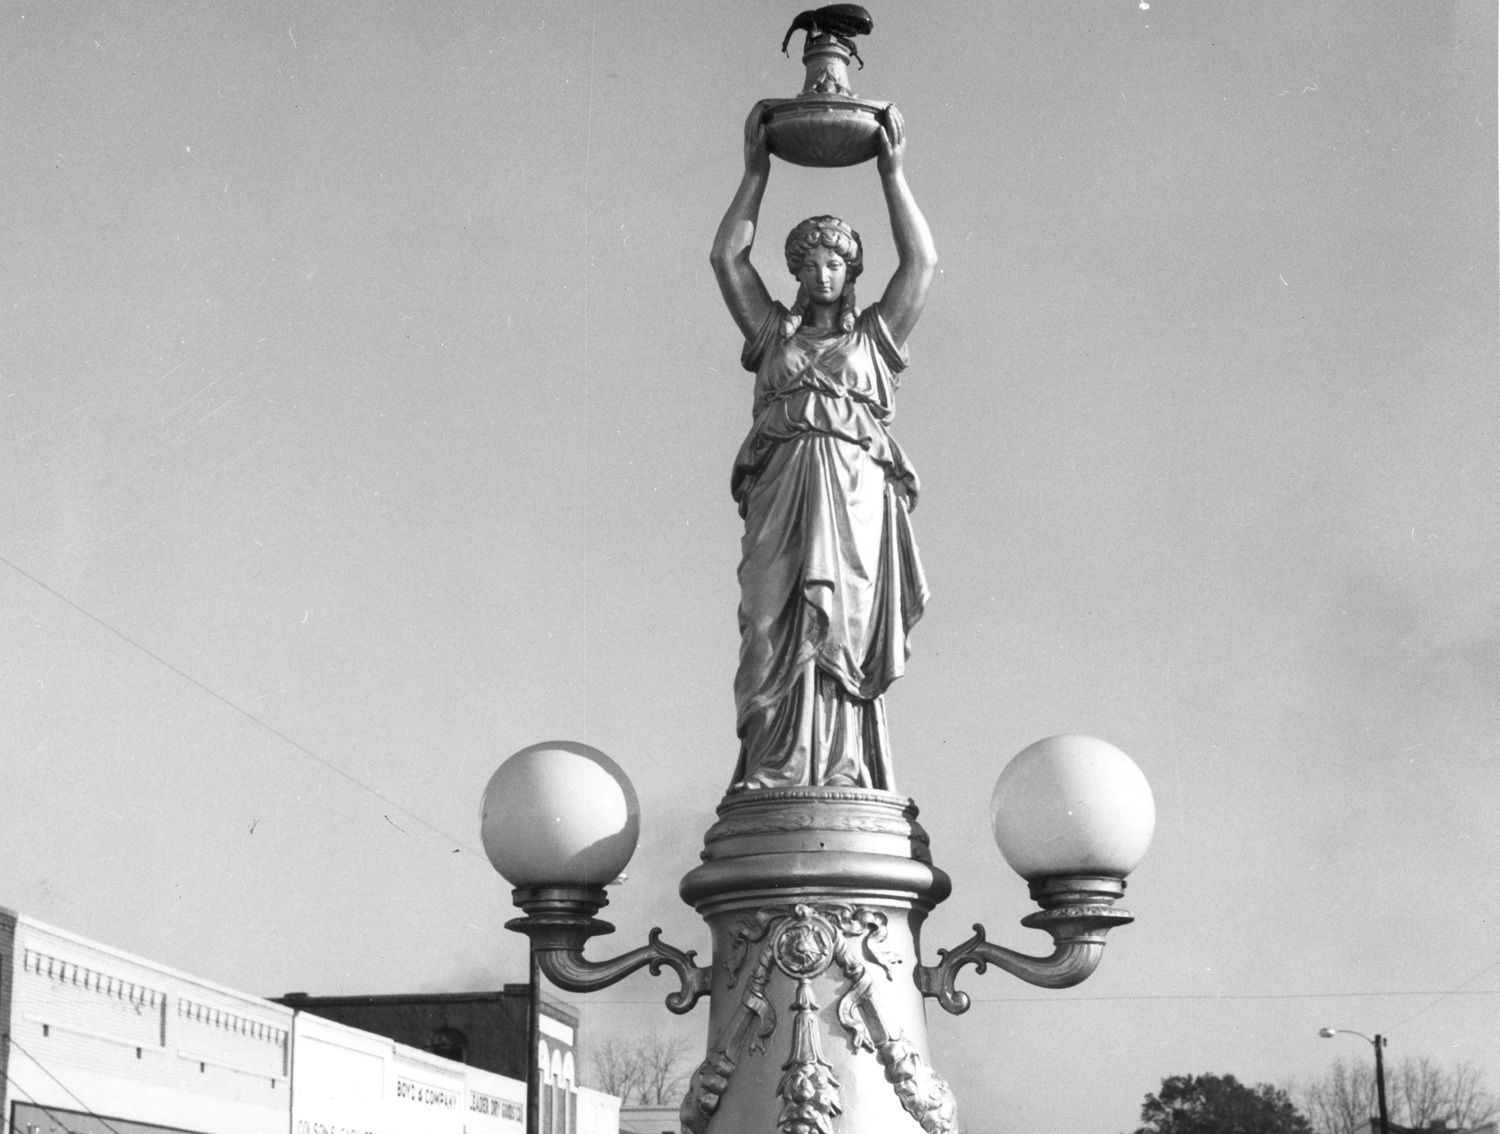 World’s Largest Boll Weevil Monument: world record in Enterprise, Alabama